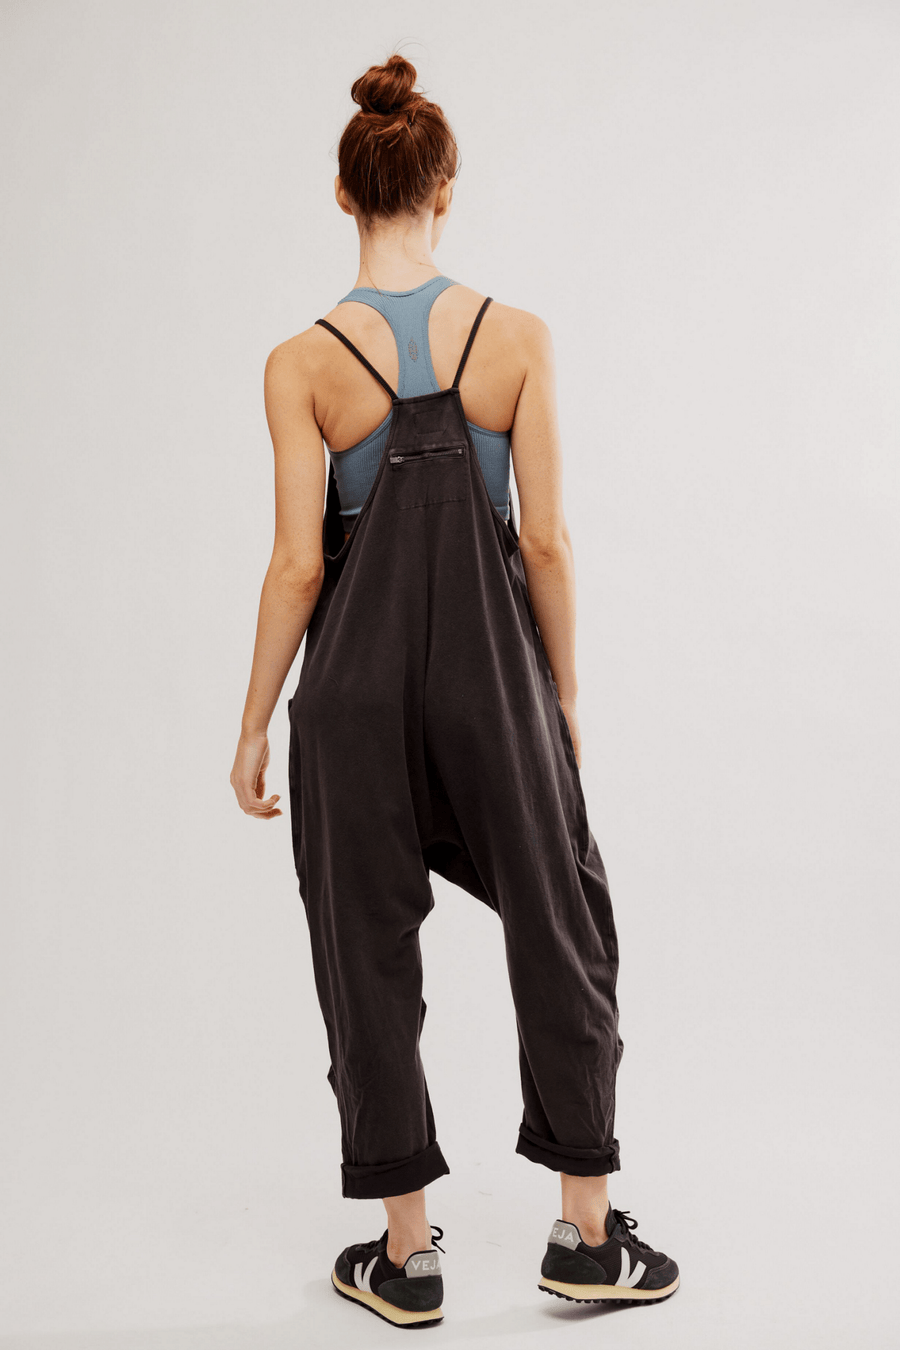 Hot Shot Onesie by Free People - Washed Black - Blue Sky Fashions & Lingerie